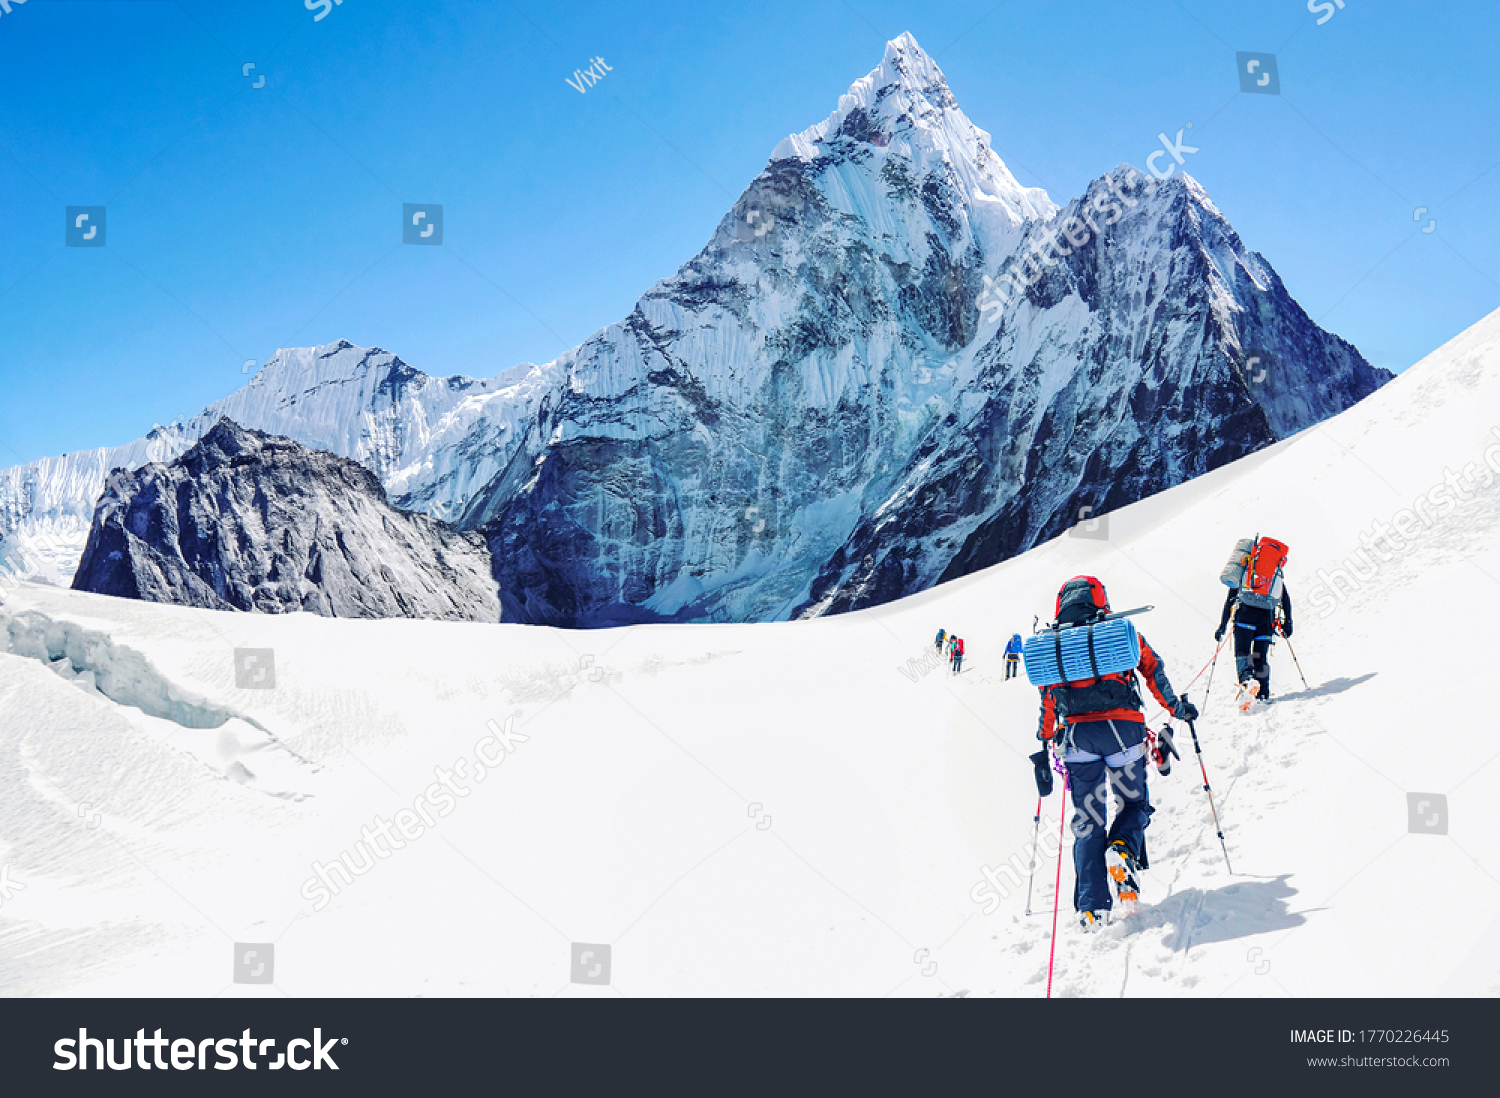 Group of climbers reaching the Everest summit in Nepal.  #1770226445